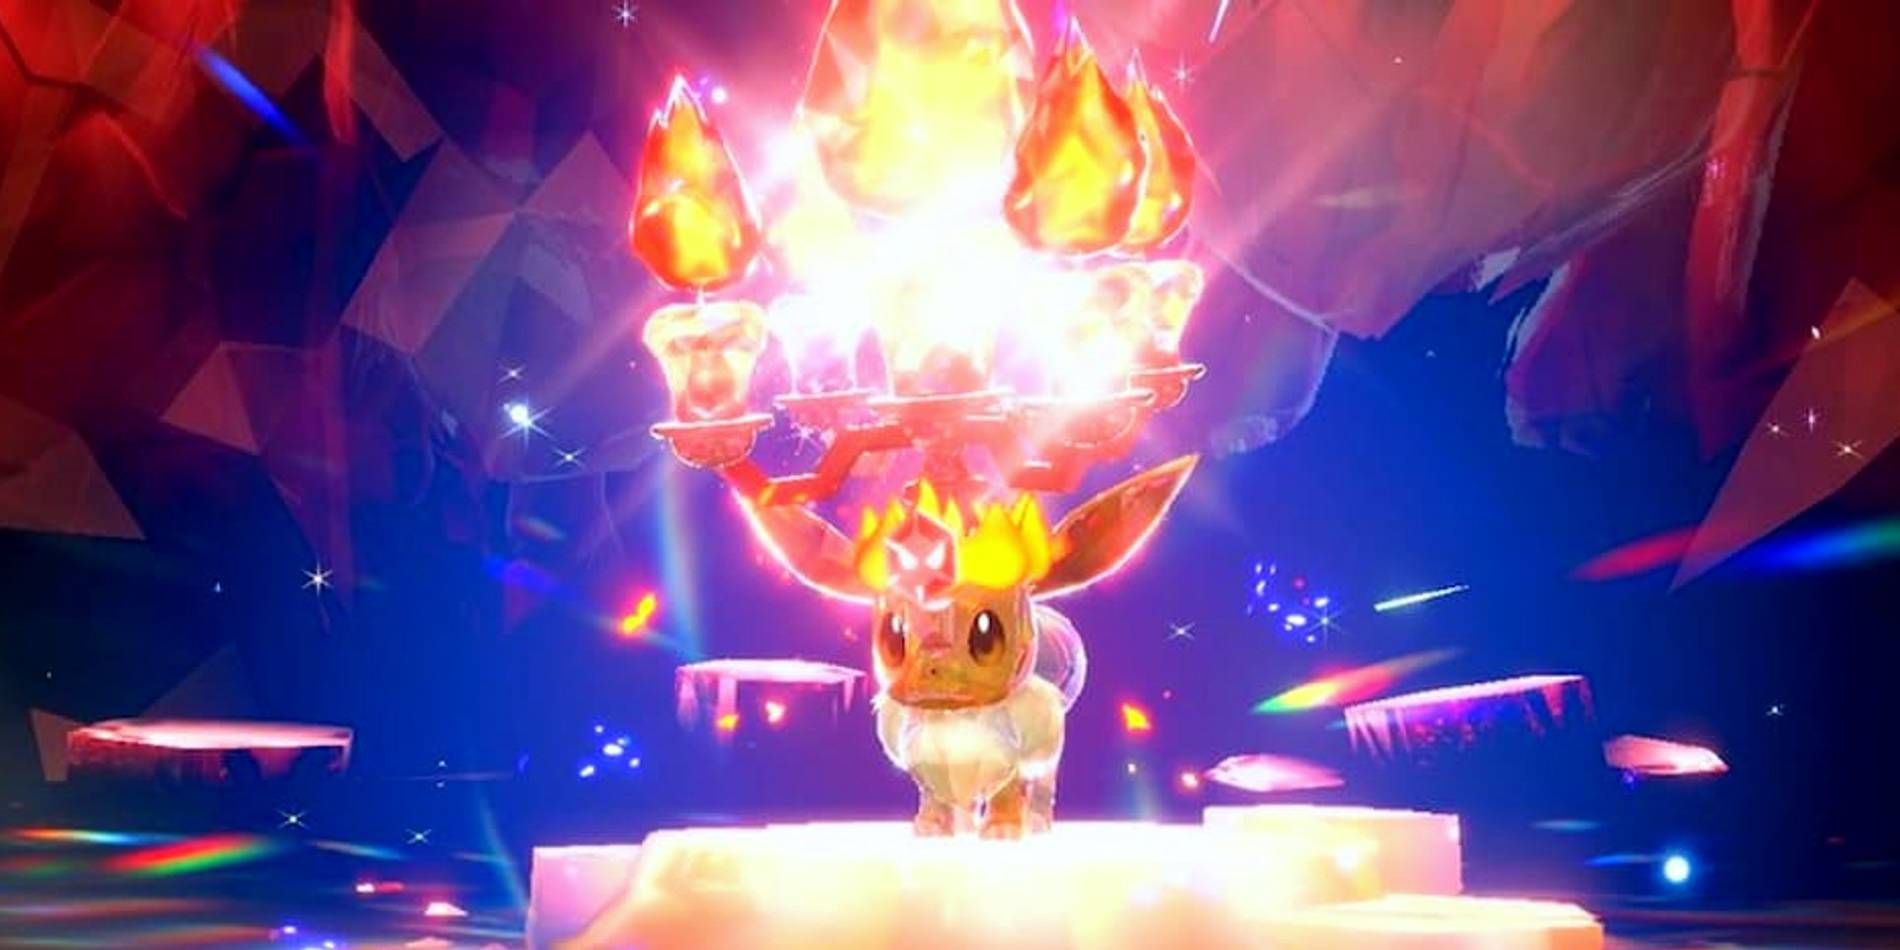 Pokemon Scarlet and Violet Tera Raid Battle Eevee Terastralized into a Fire-type